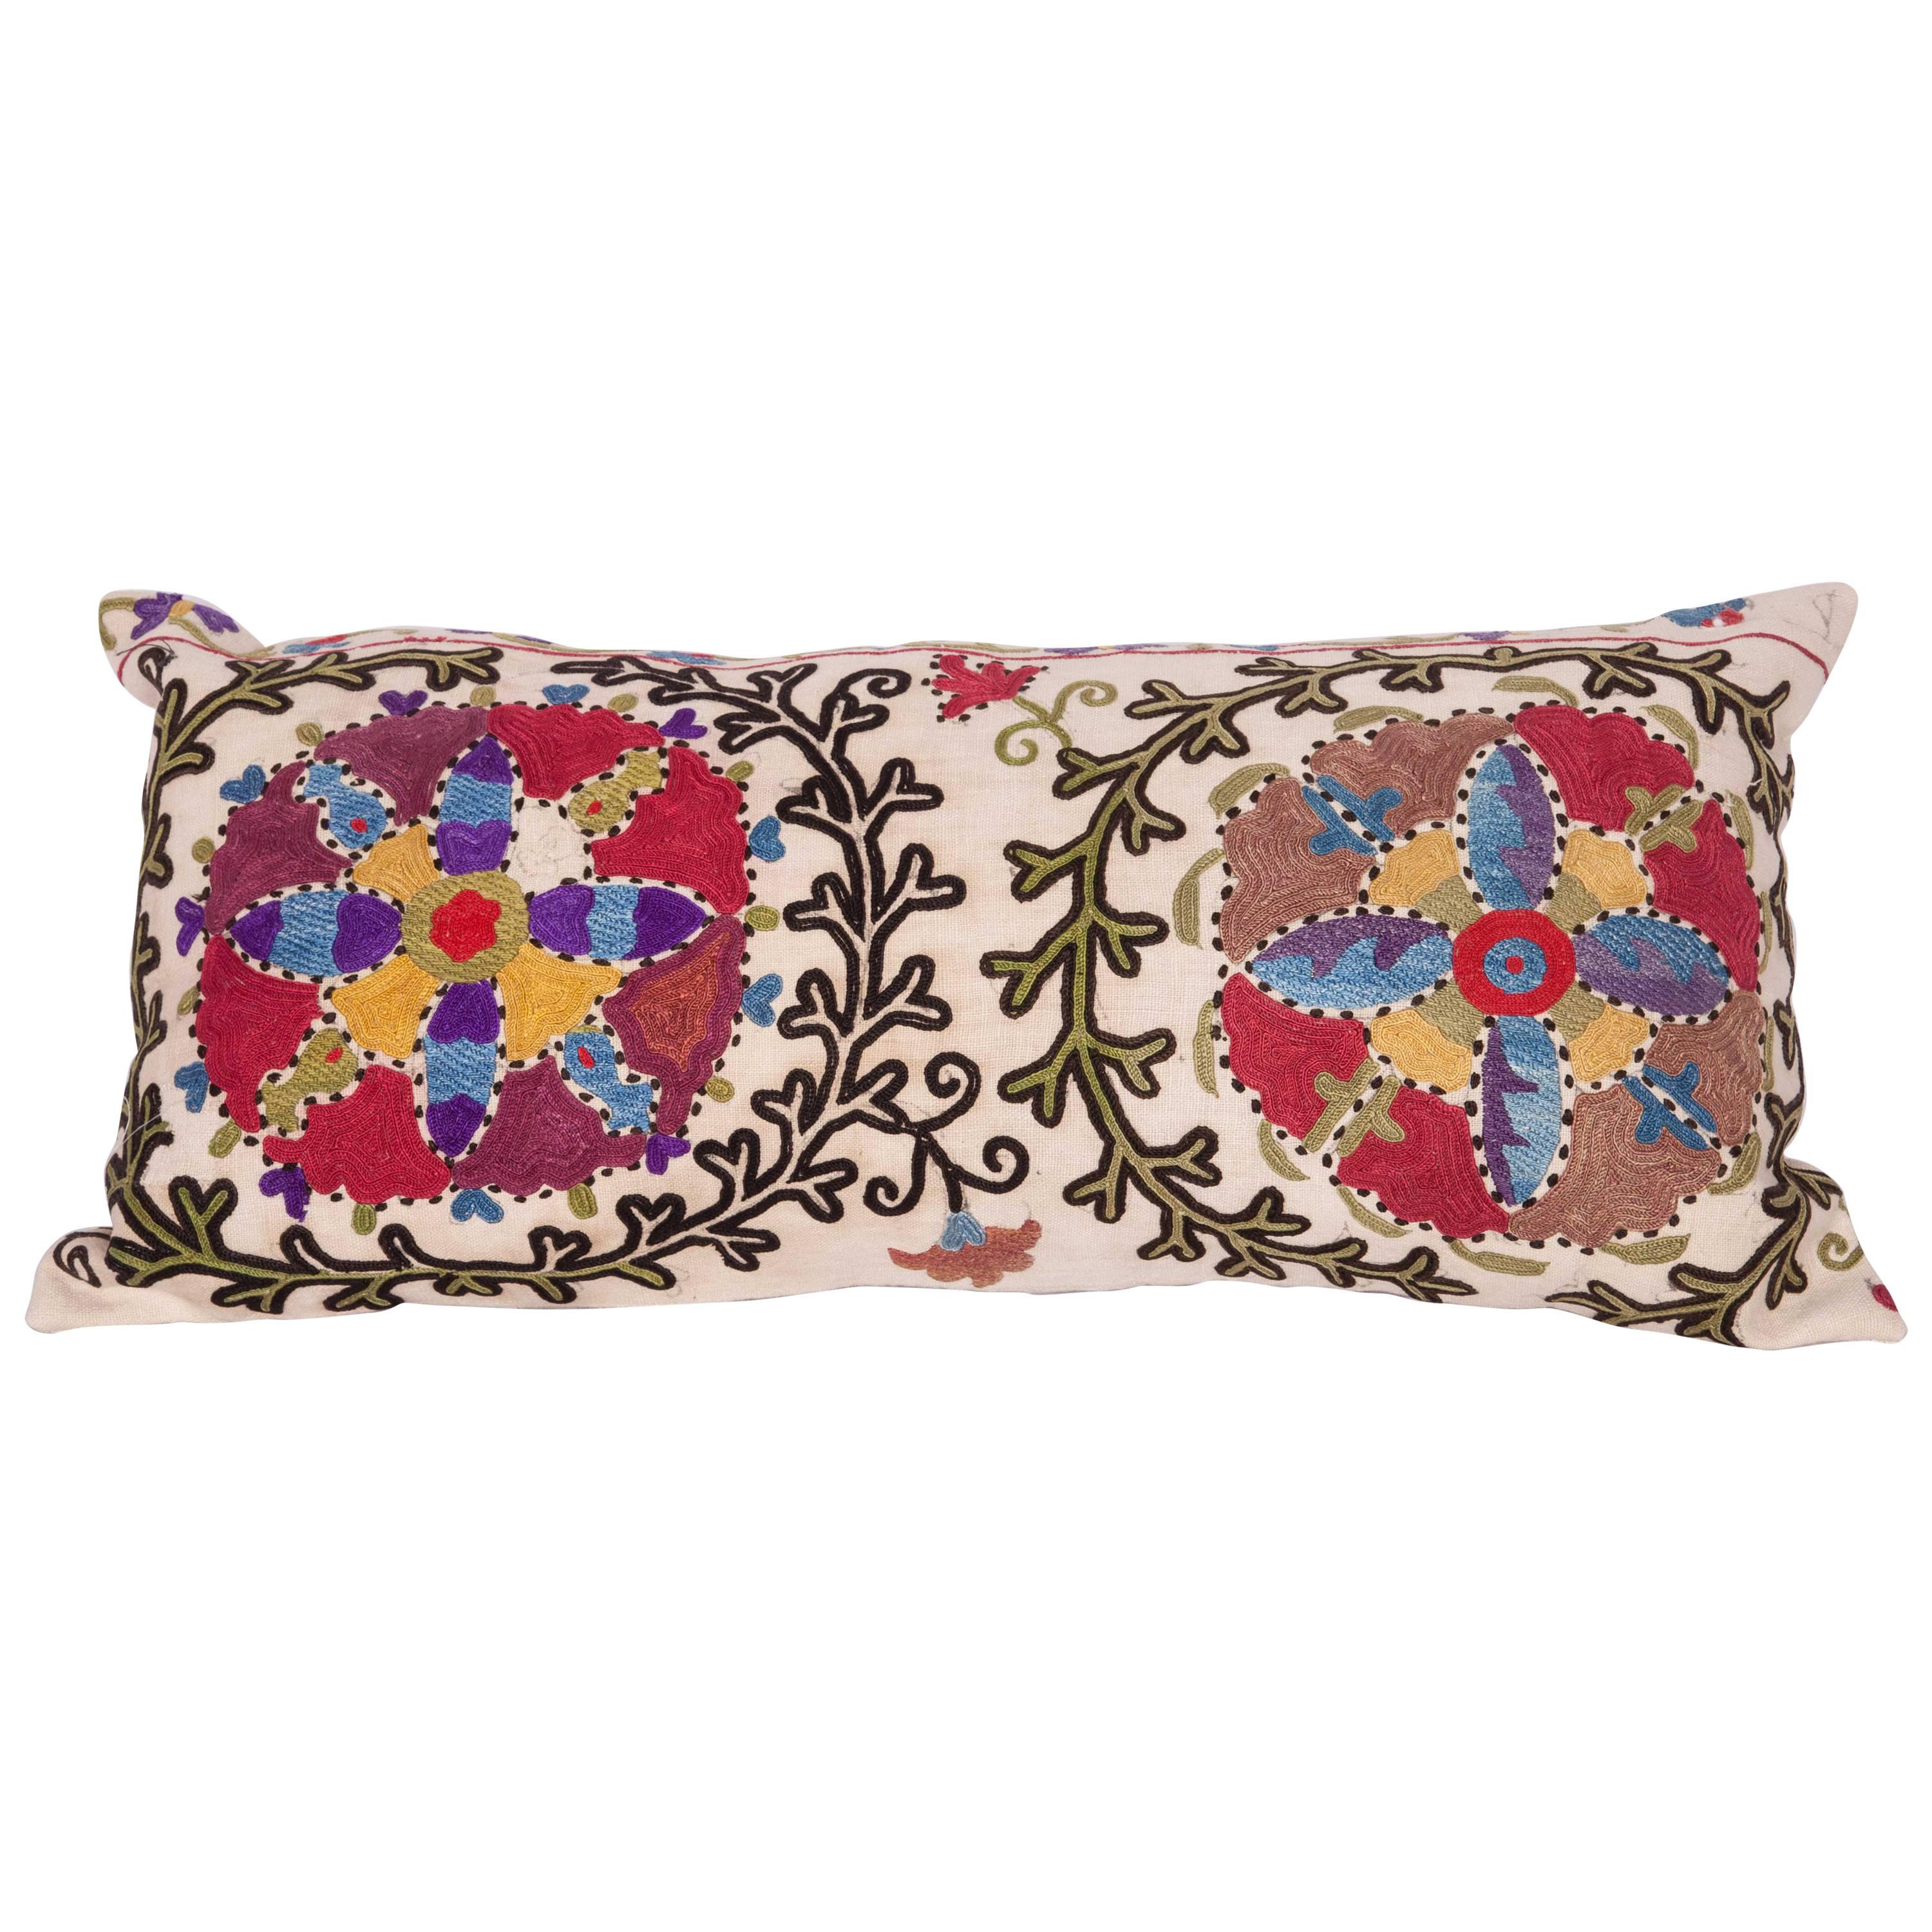 Antique Pillow Made Out of a Late 19th Century, Uzbek Bukhara Suzani